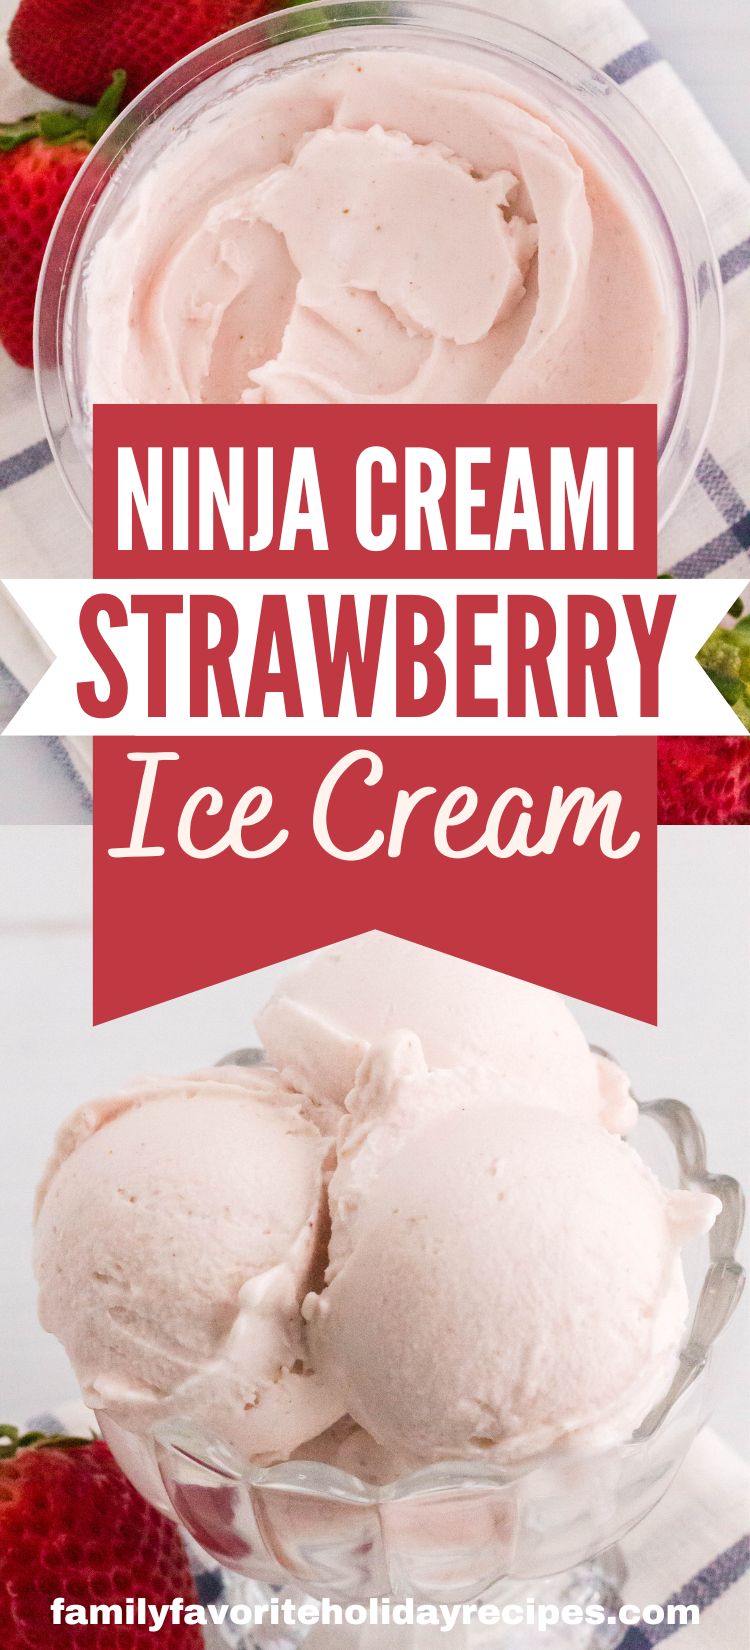 two photos;  one shows a pint of Ninja Creami strawberry ice cream, the other shows scoops of fresh strawberry ice cream in a glass dessert cup